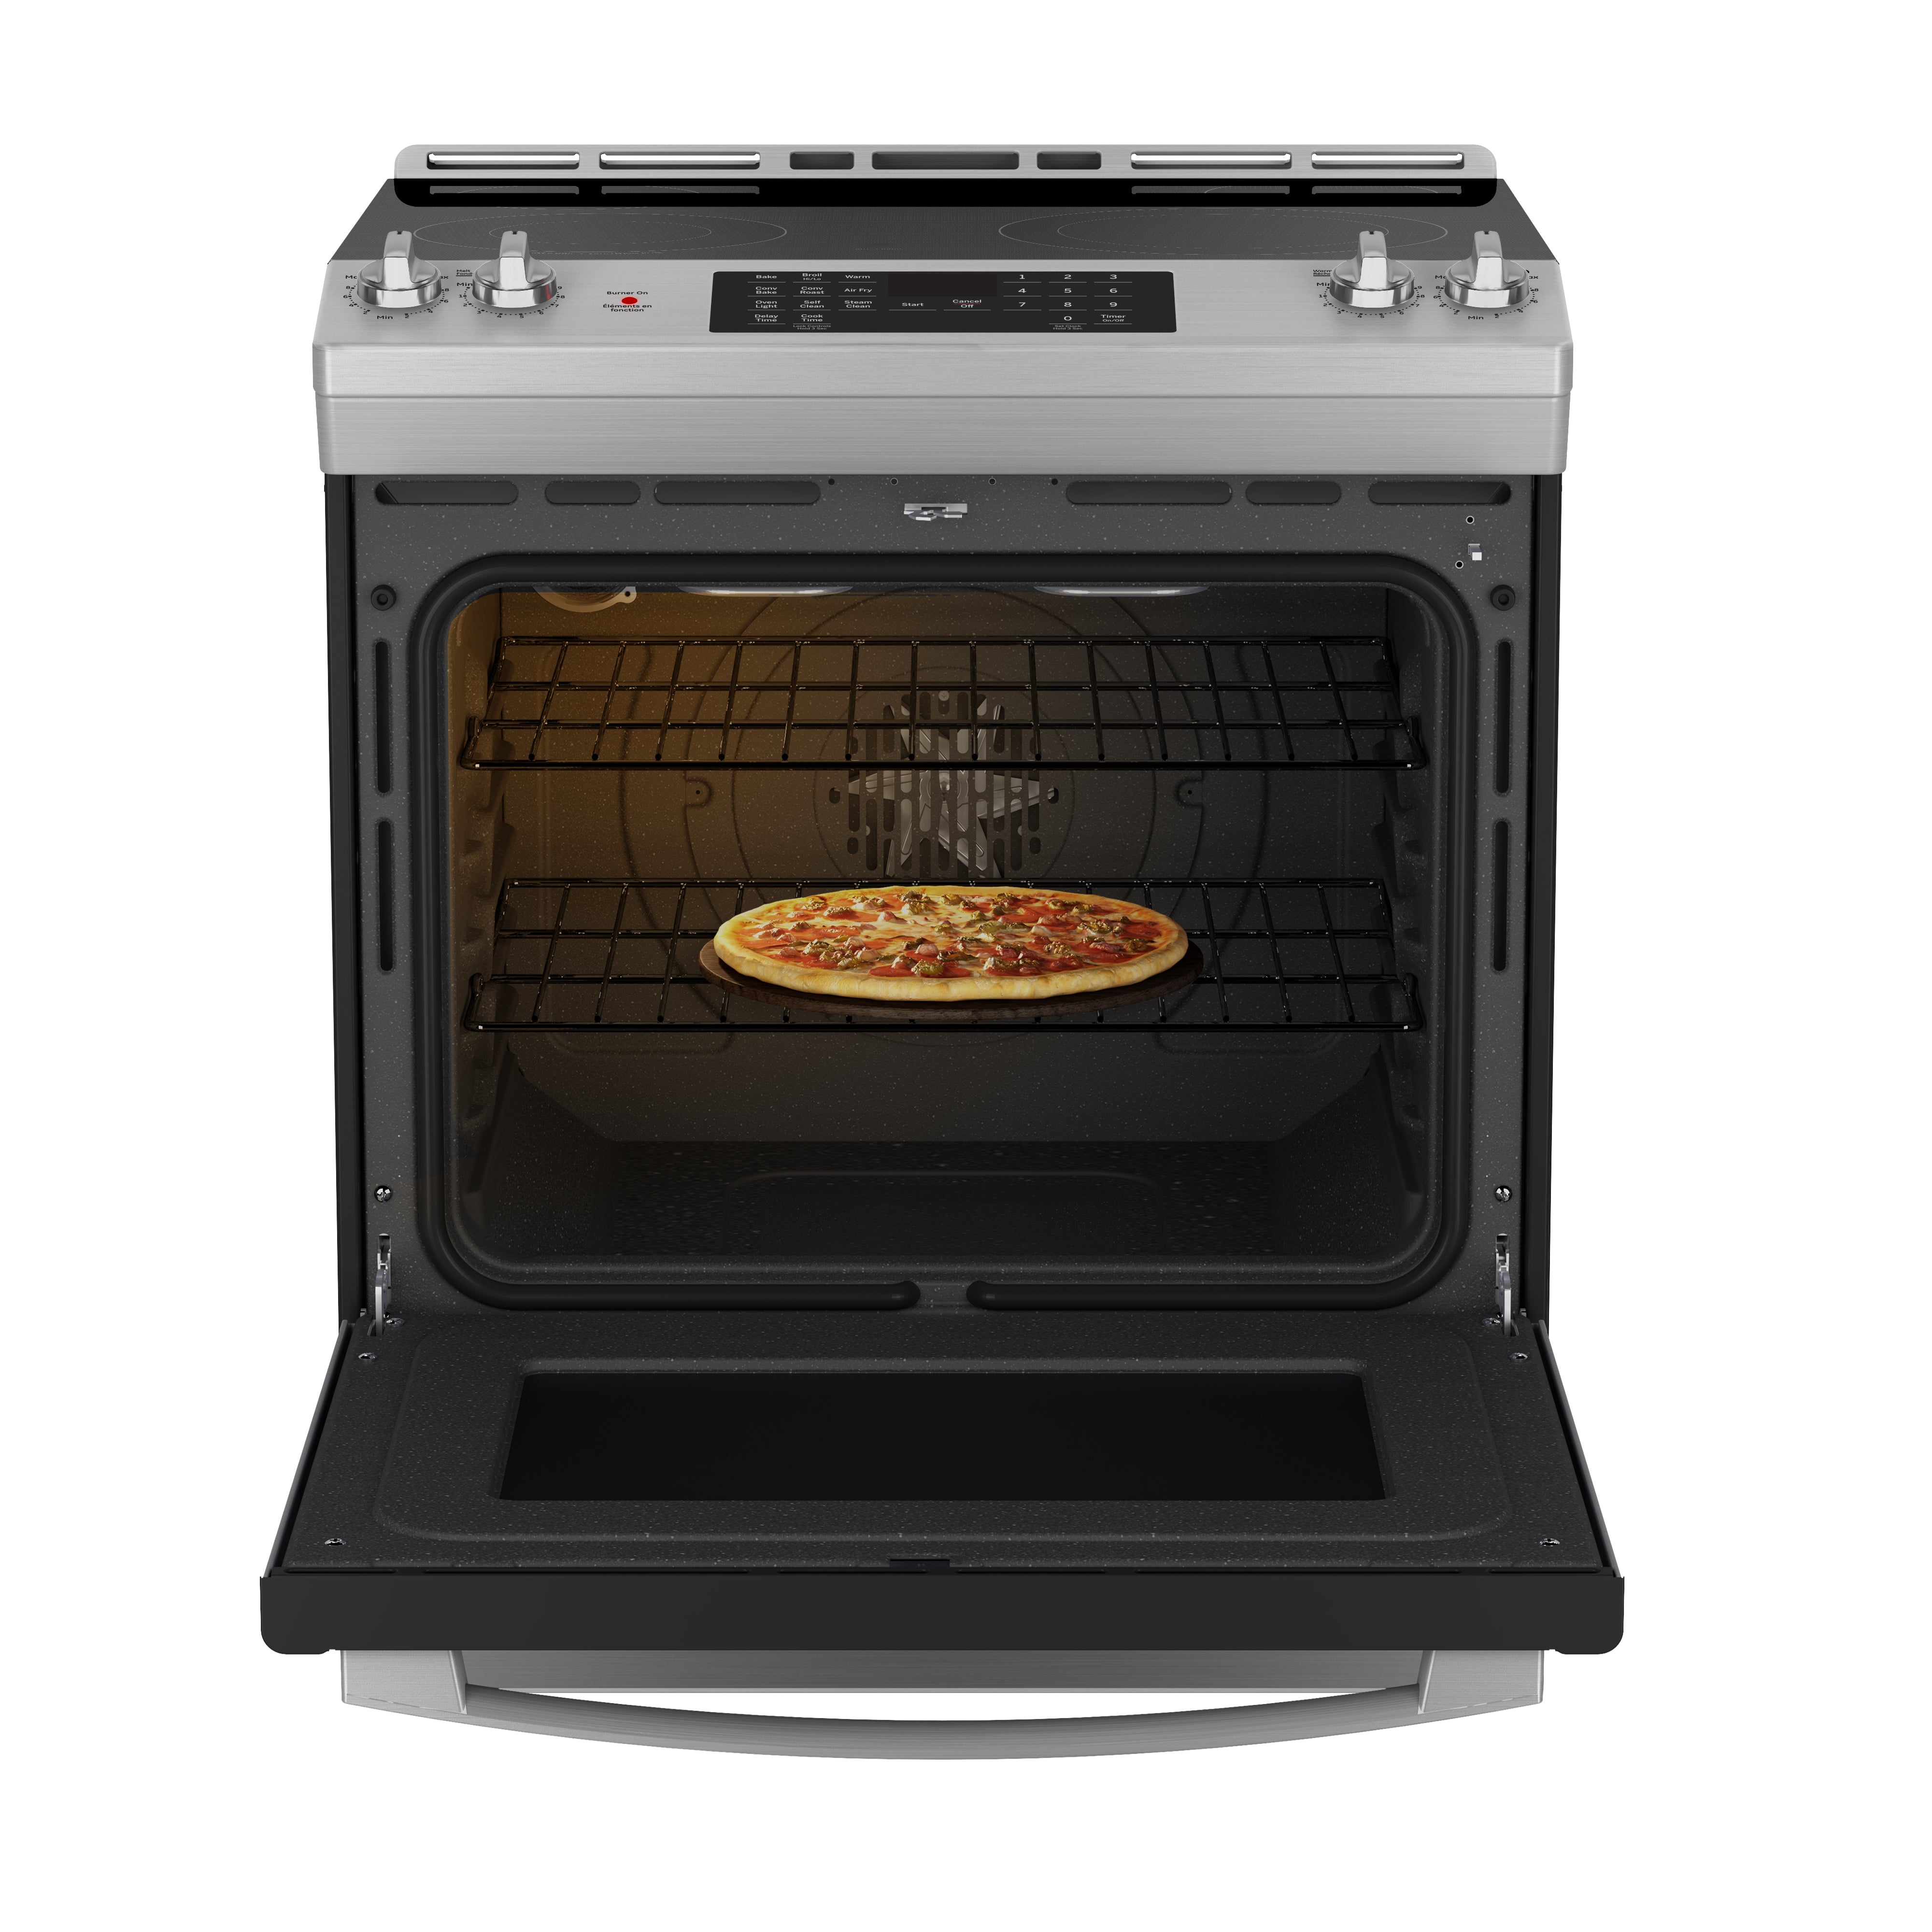 GE - 5 cu. ft  Electric Range in Stainless - JCS830SVSS